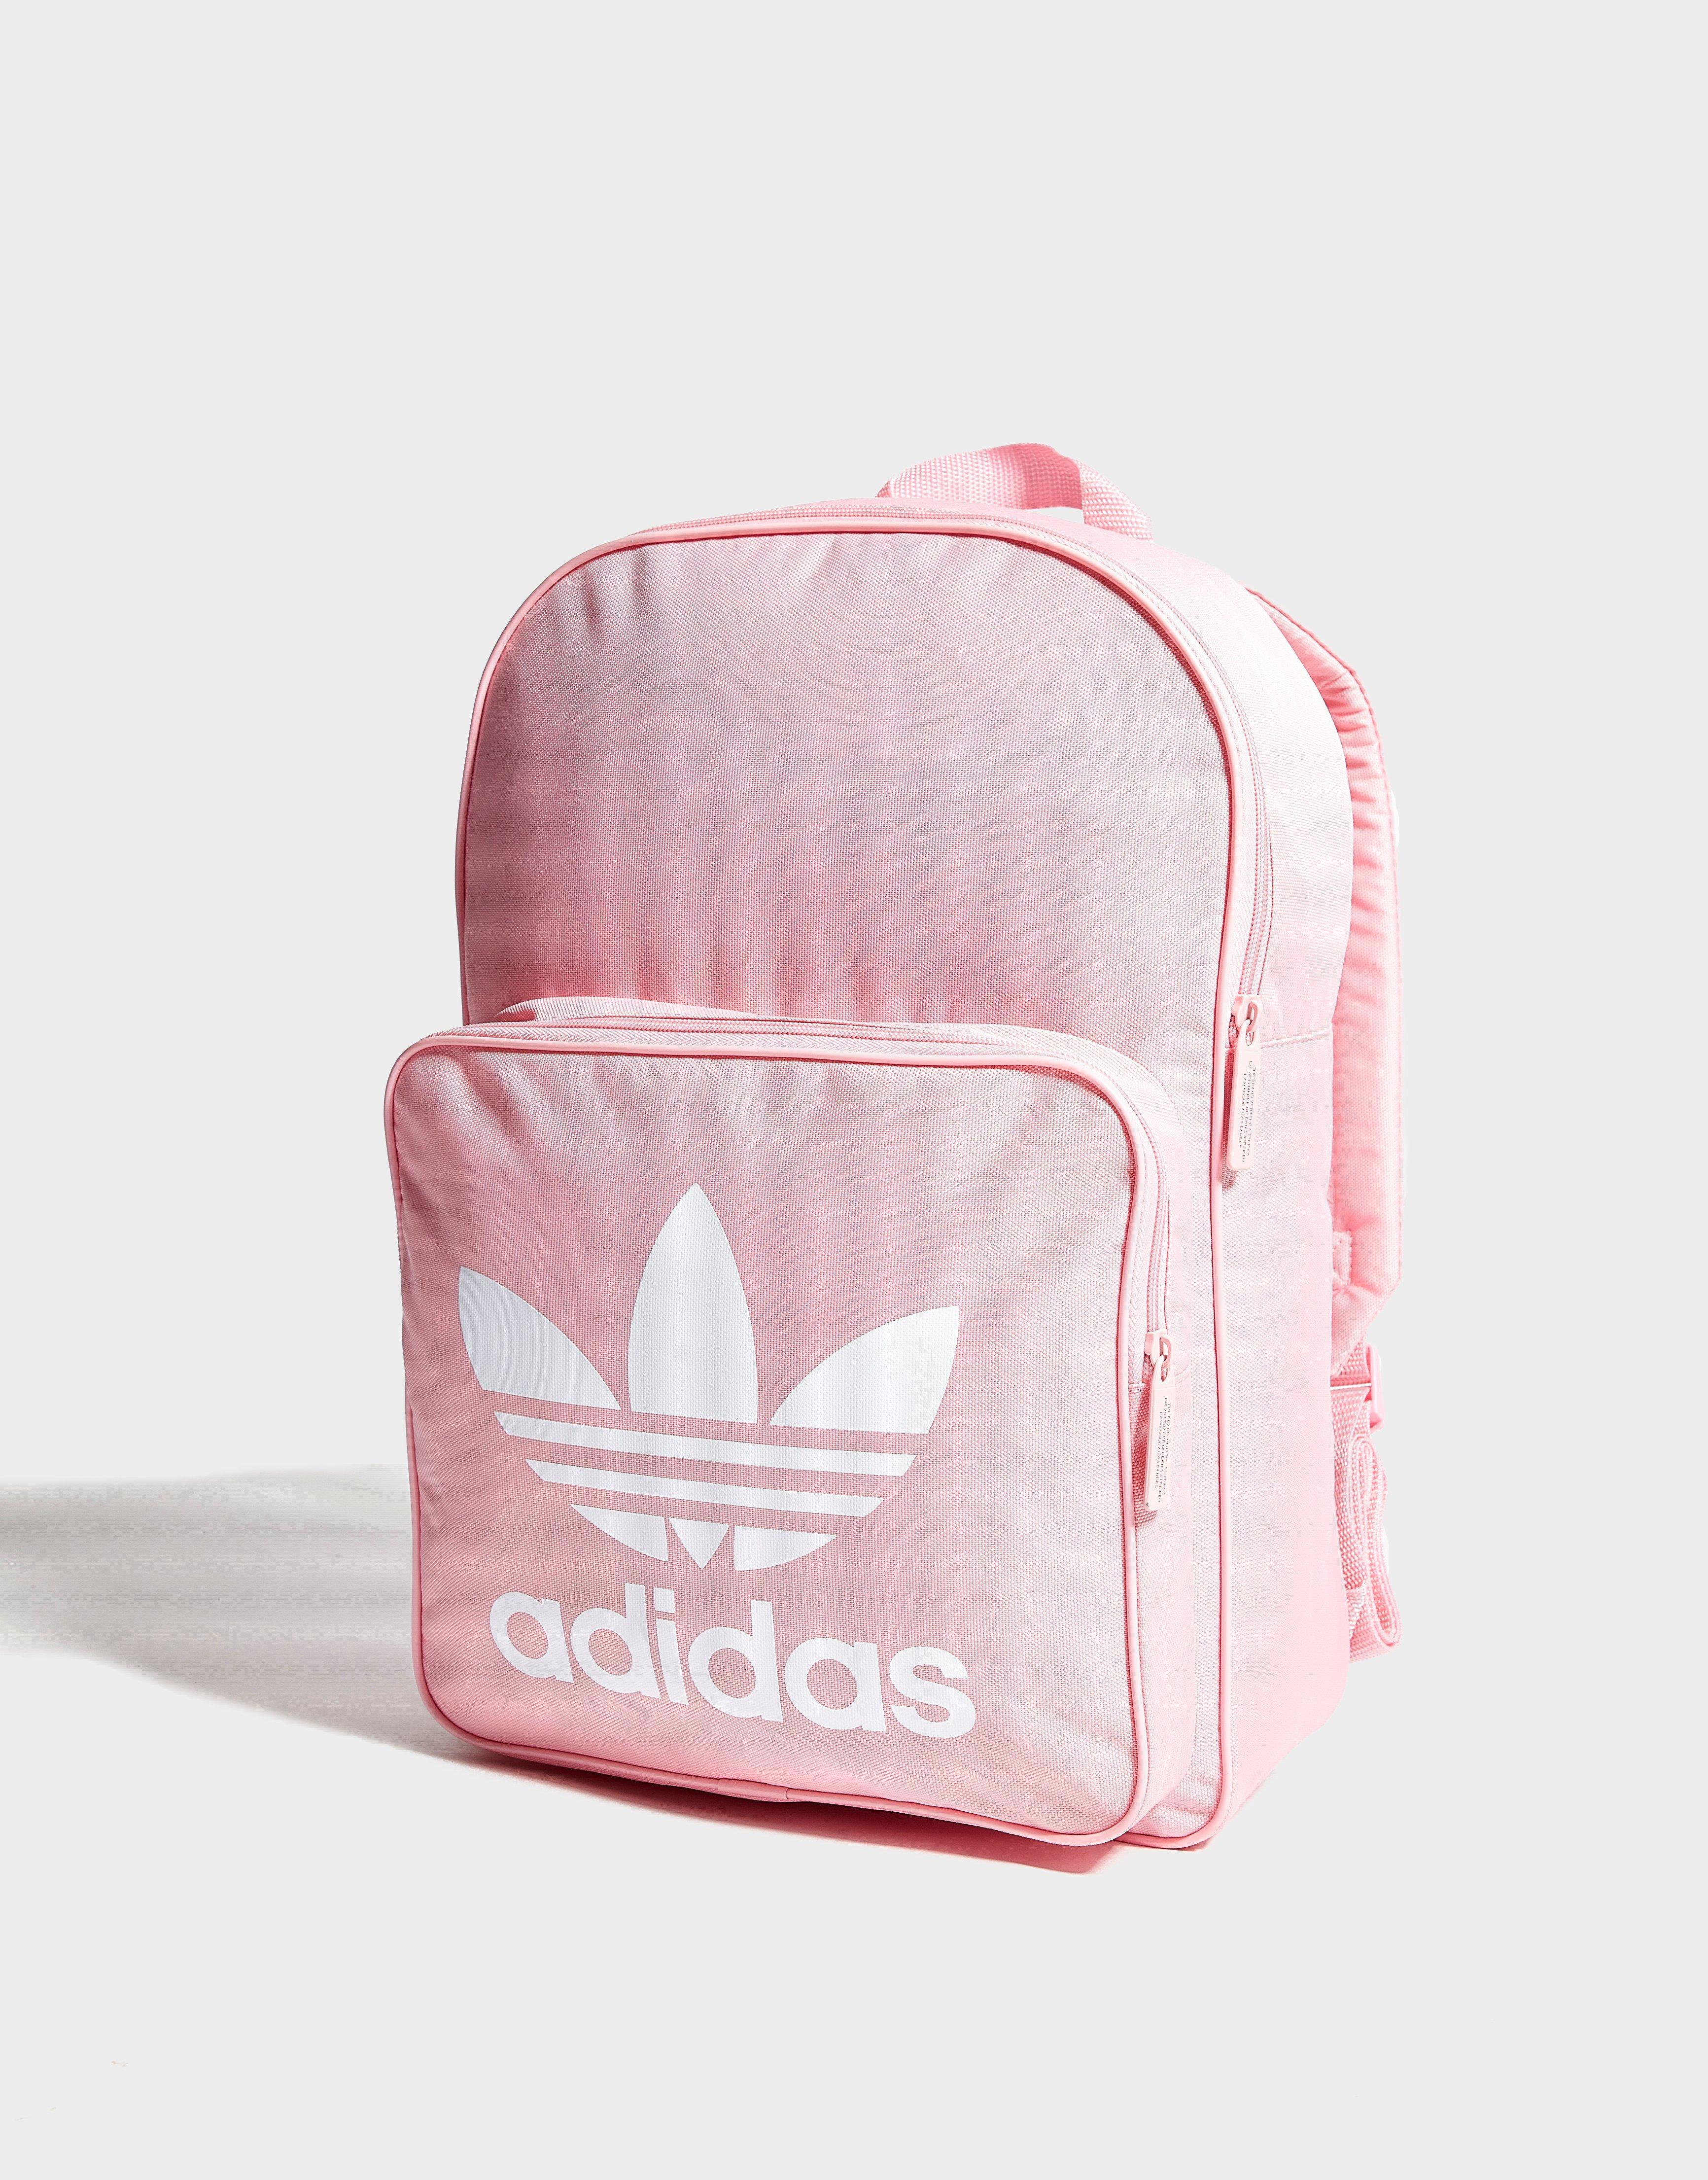 pink and white adidas backpack